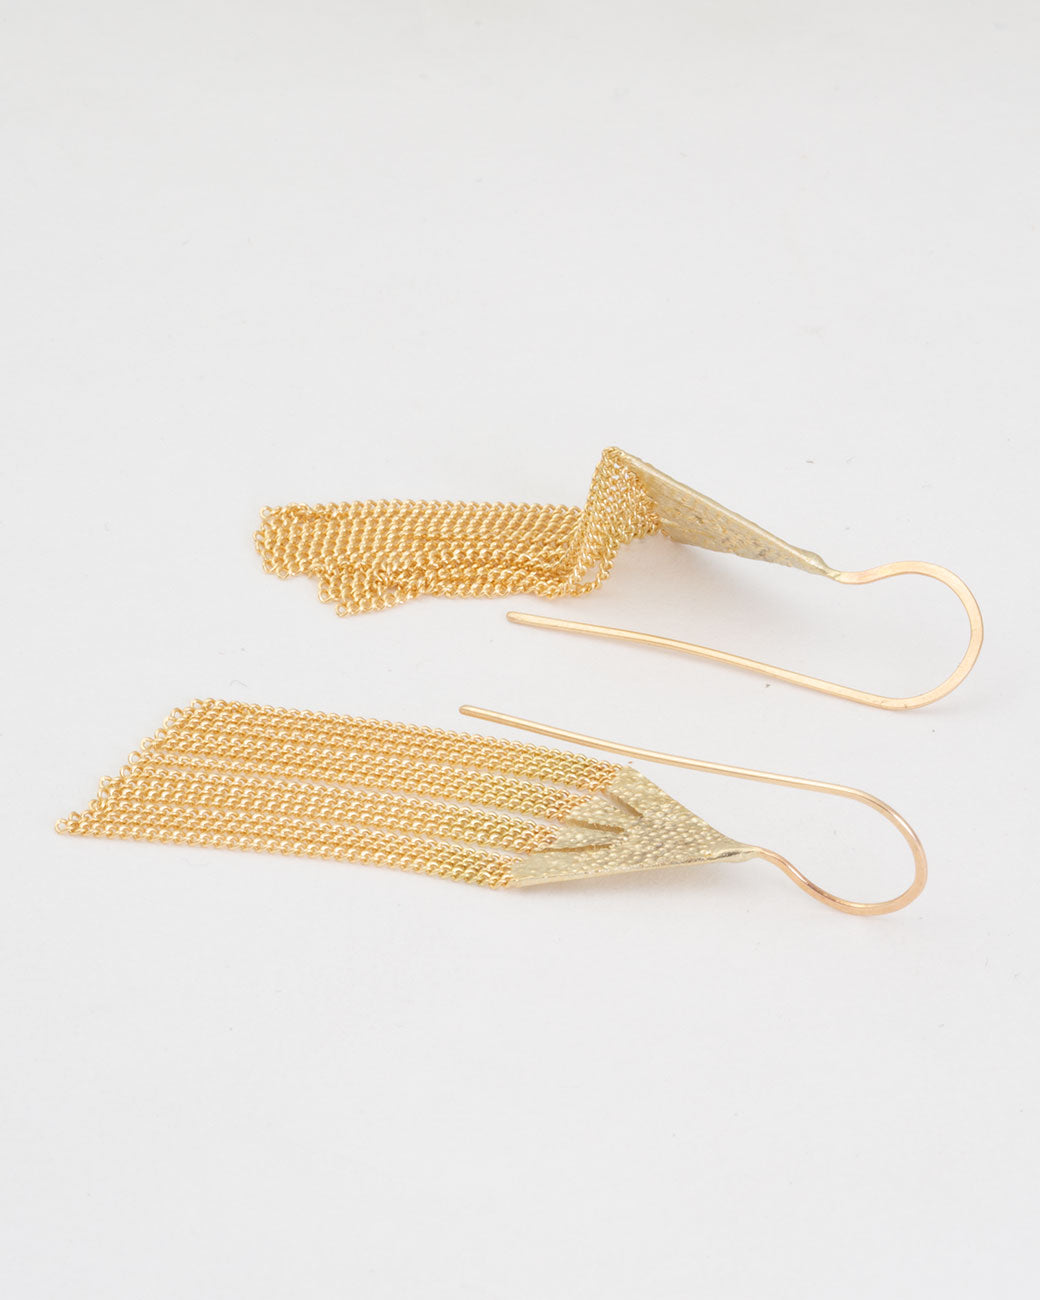 18k yellow gold icicle chain earrings by Hannah Keefe, shown laying flat.